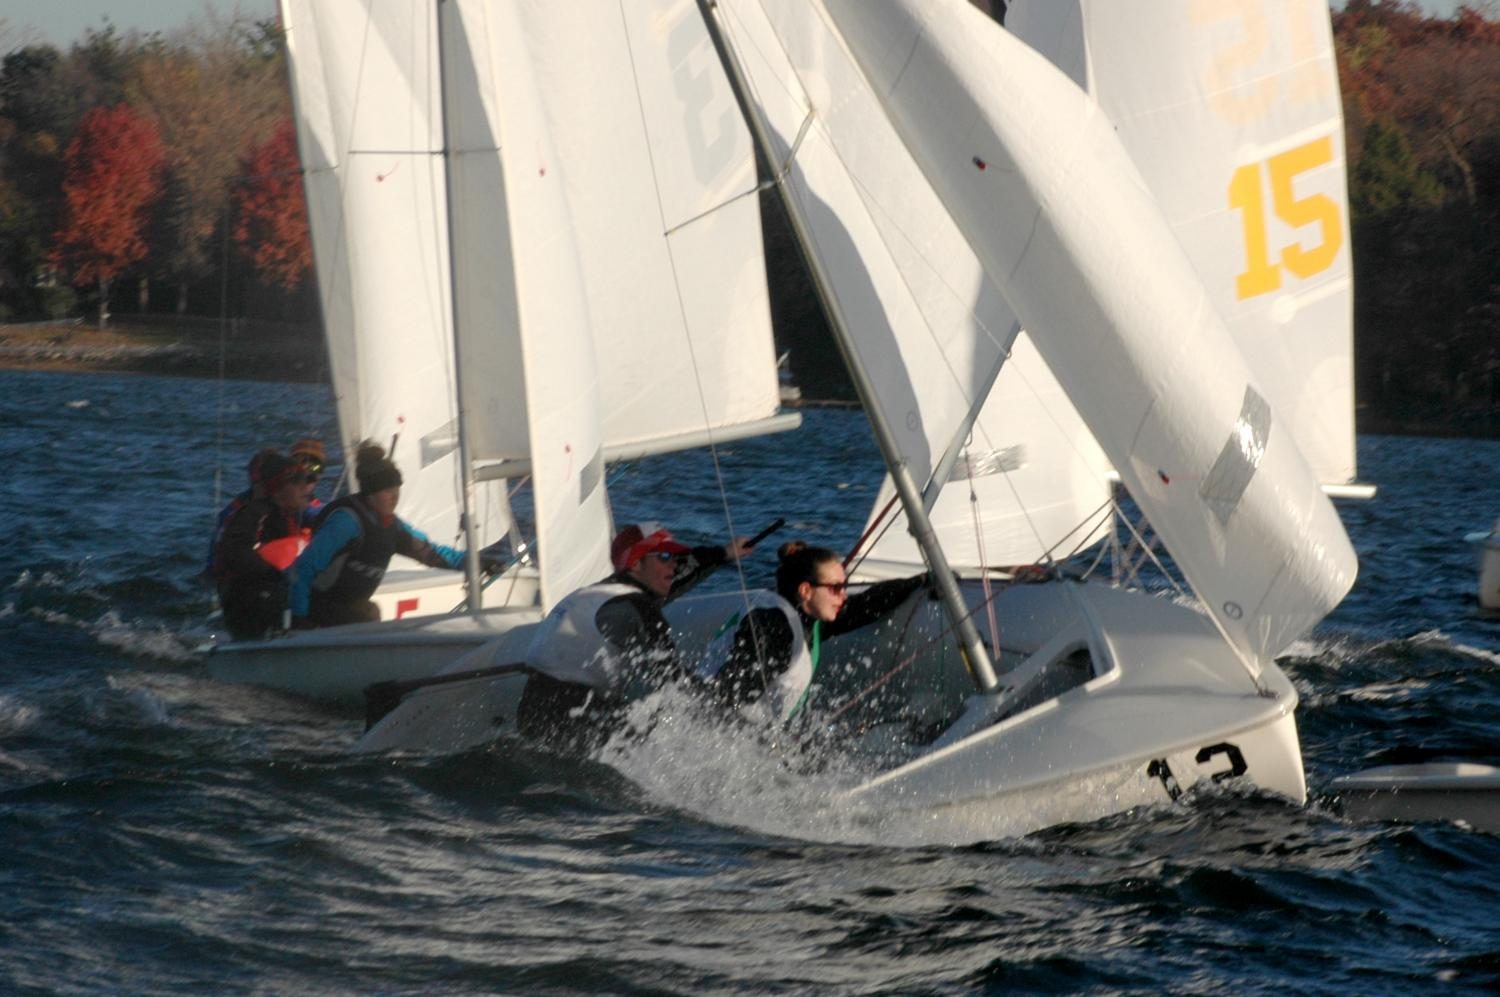 Senior+Jack+Indritz+sails+at+a+regatta+in+a+two-person+boat.+Once+you+race+for+a+while+with+your+crew%2C+you+don%E2%80%99t+really+need+to+communicate+anymore+because+you%E2%80%99ve+practiced+so+much+that+you+know+what+the+other+person+is+gonna+do+and+when%2C+Indritz+said.